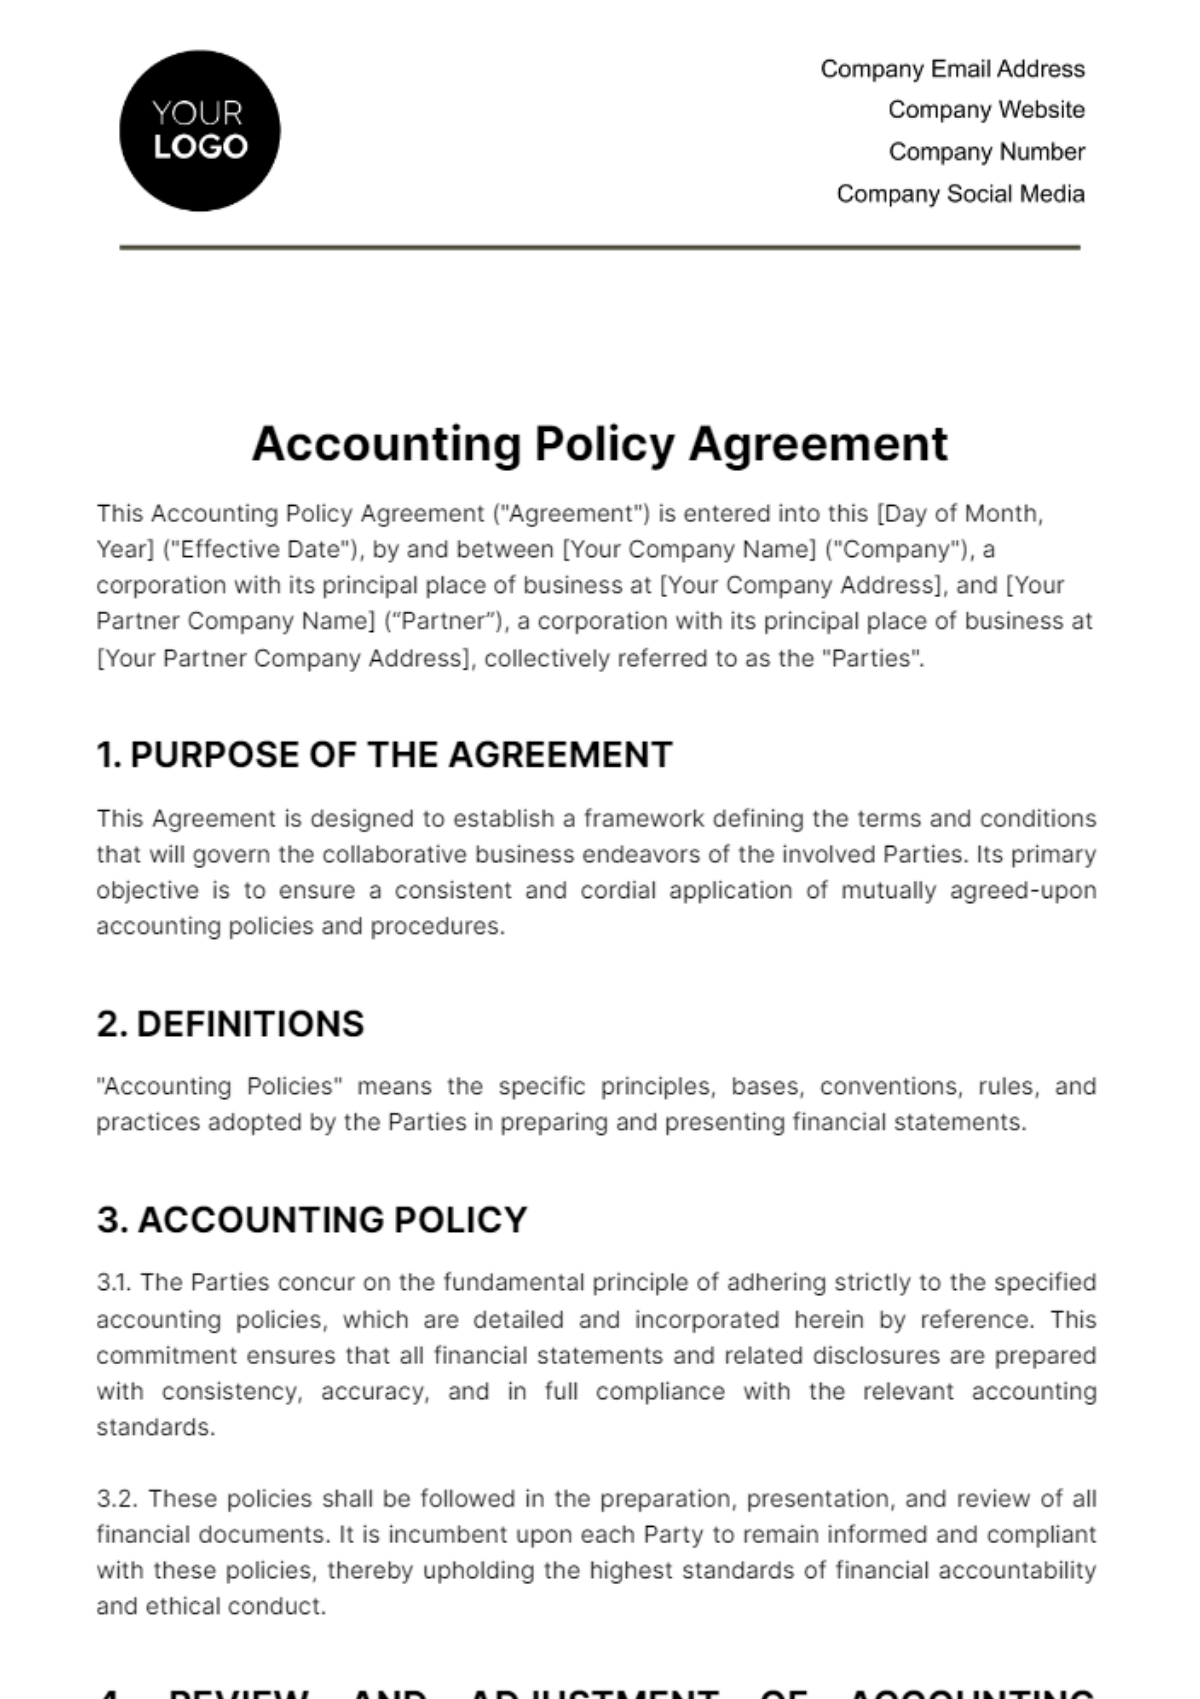 Free Accounting Policy Agreement Template